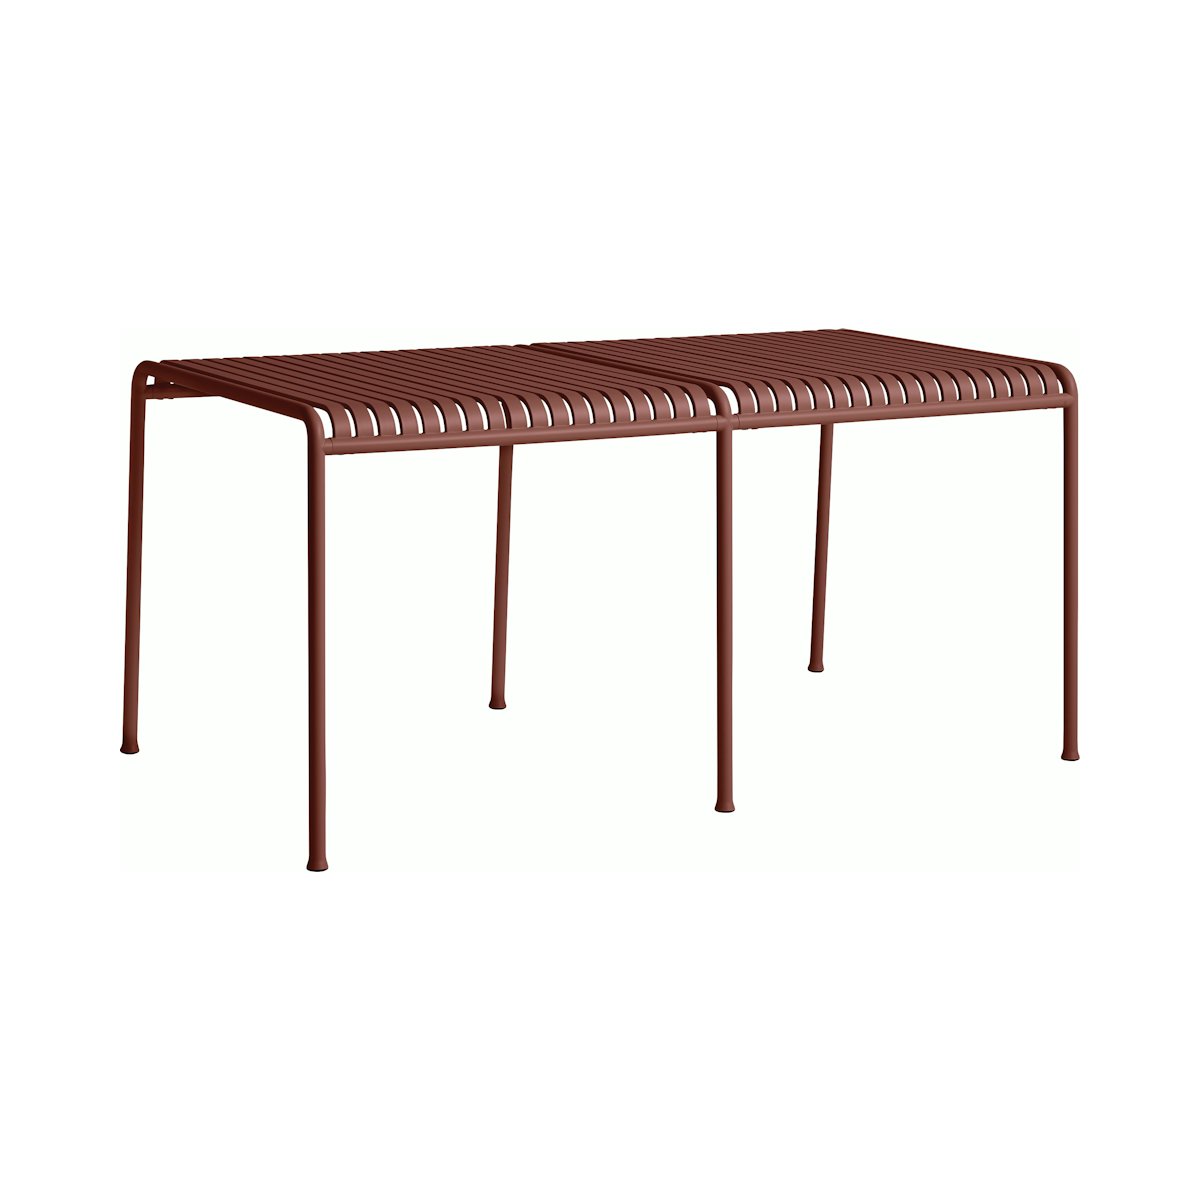 Palissade Table with Middle Leg, Cafe Table